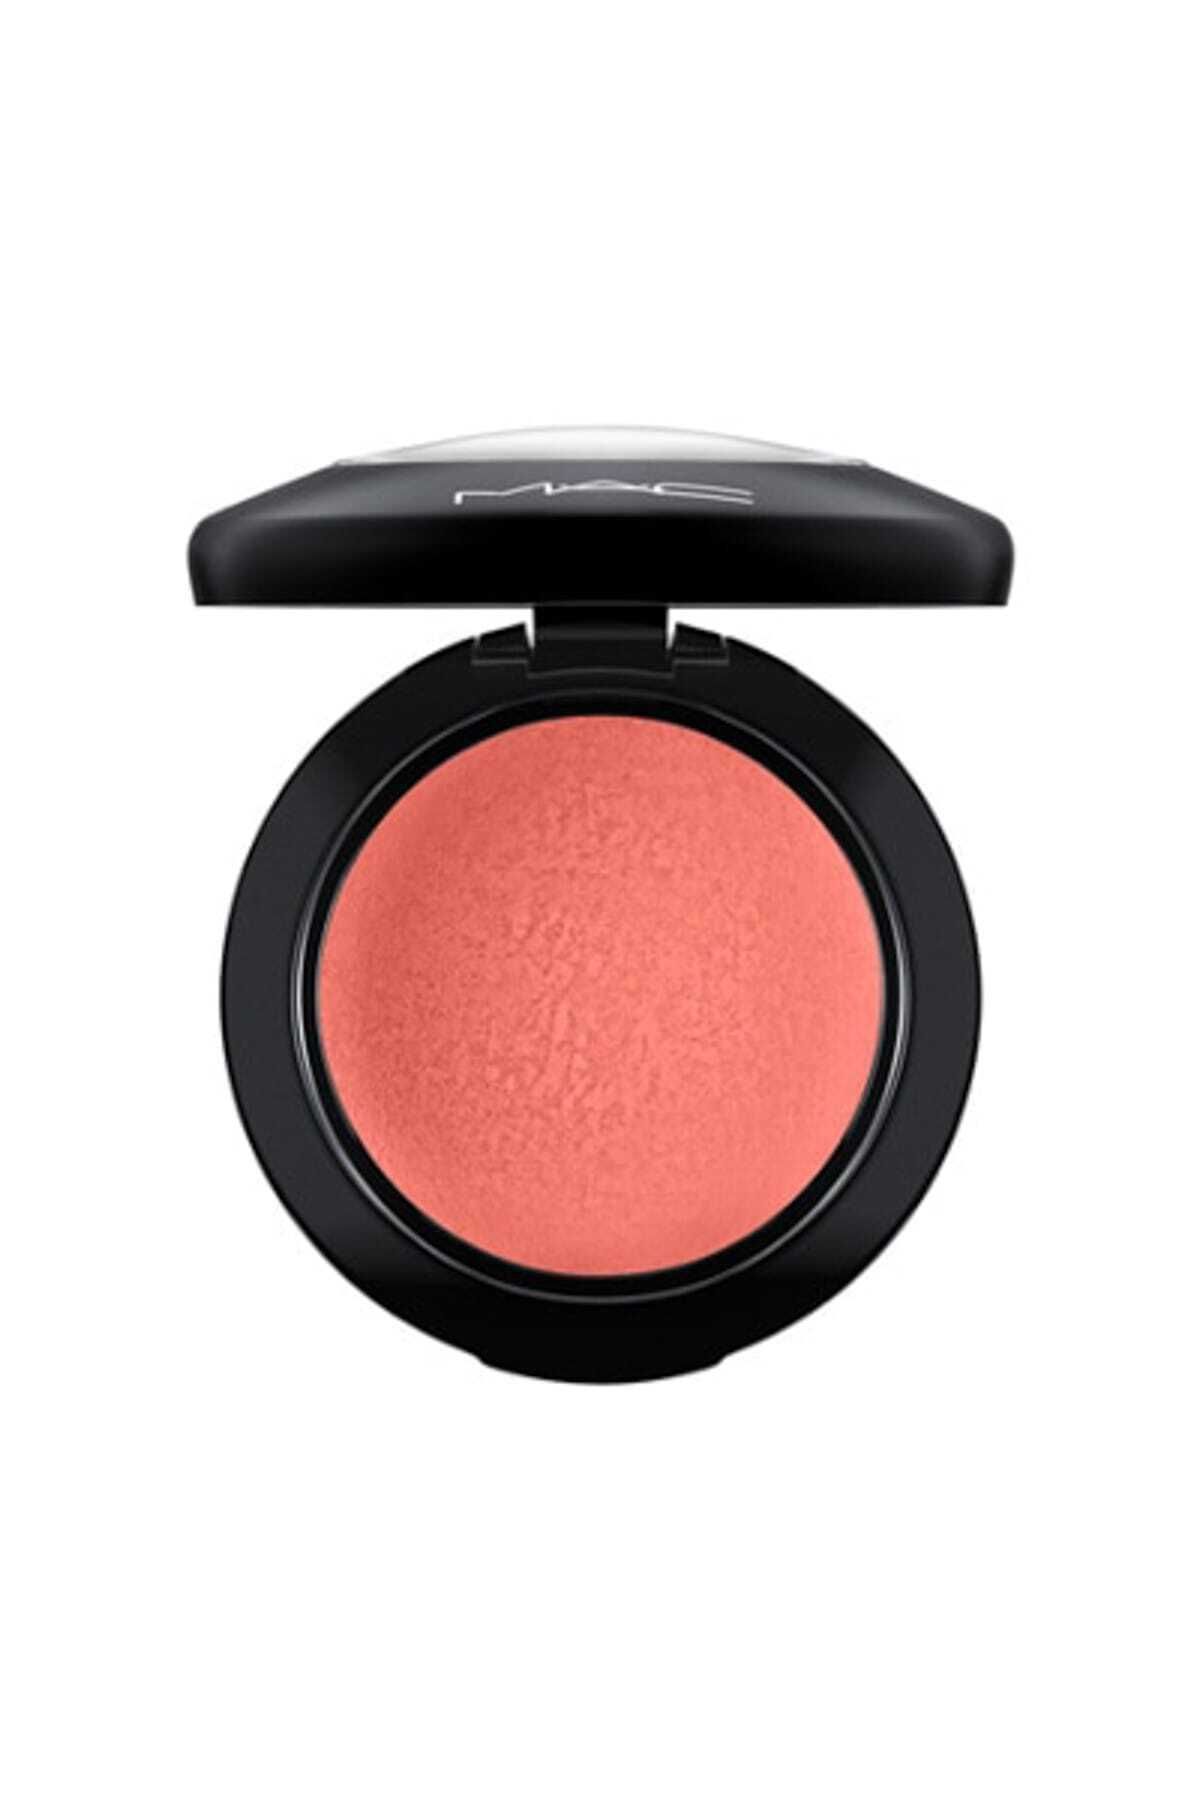 Mac MİNERALİZED BLUSH FLİRTİNG DANGER BLUSH CREATİNG SMOOTH-LİGHT AND SHİMMERİNG COLOR - 3.5 G PSSN918